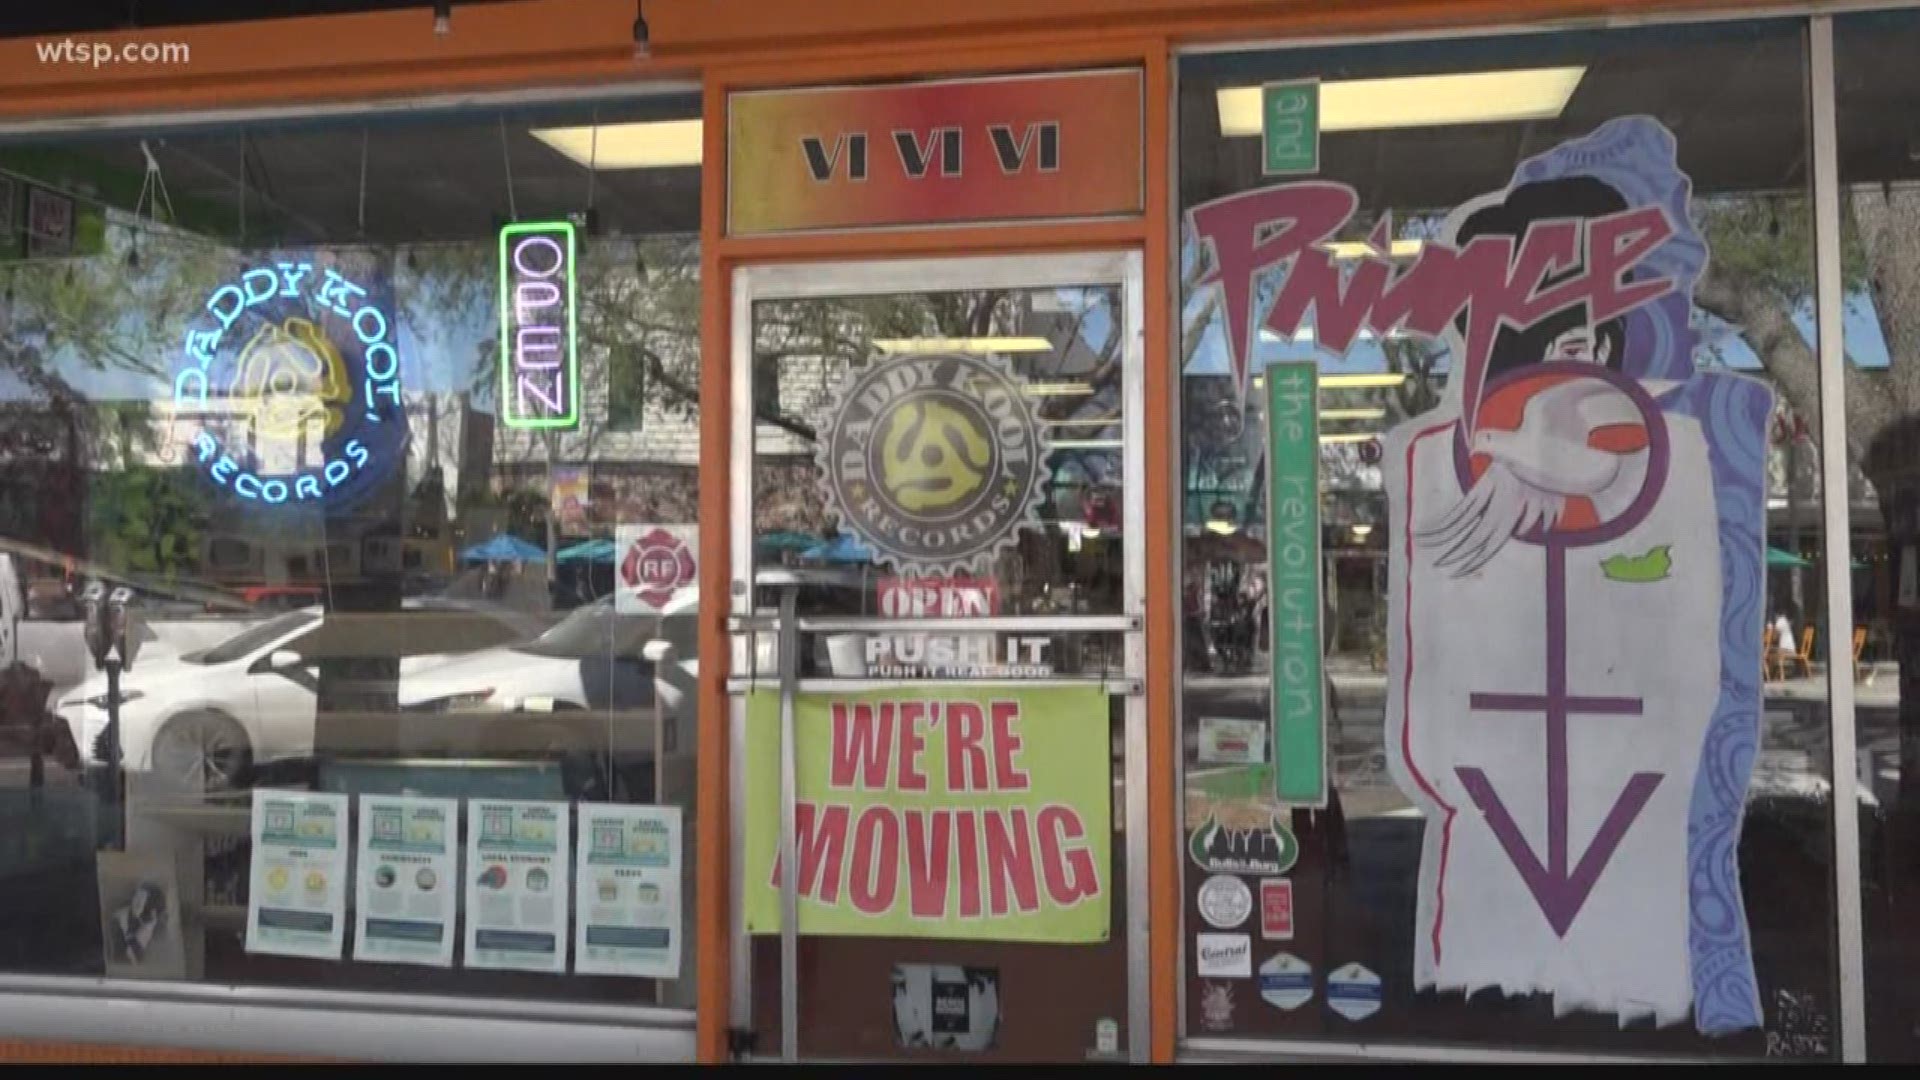 Daddy Kool Records says after nine years at its current location at 666 Central Avenue in the heart of downtown St Petersburg, they are being forced to relocate because their new landlord tripled the rent.